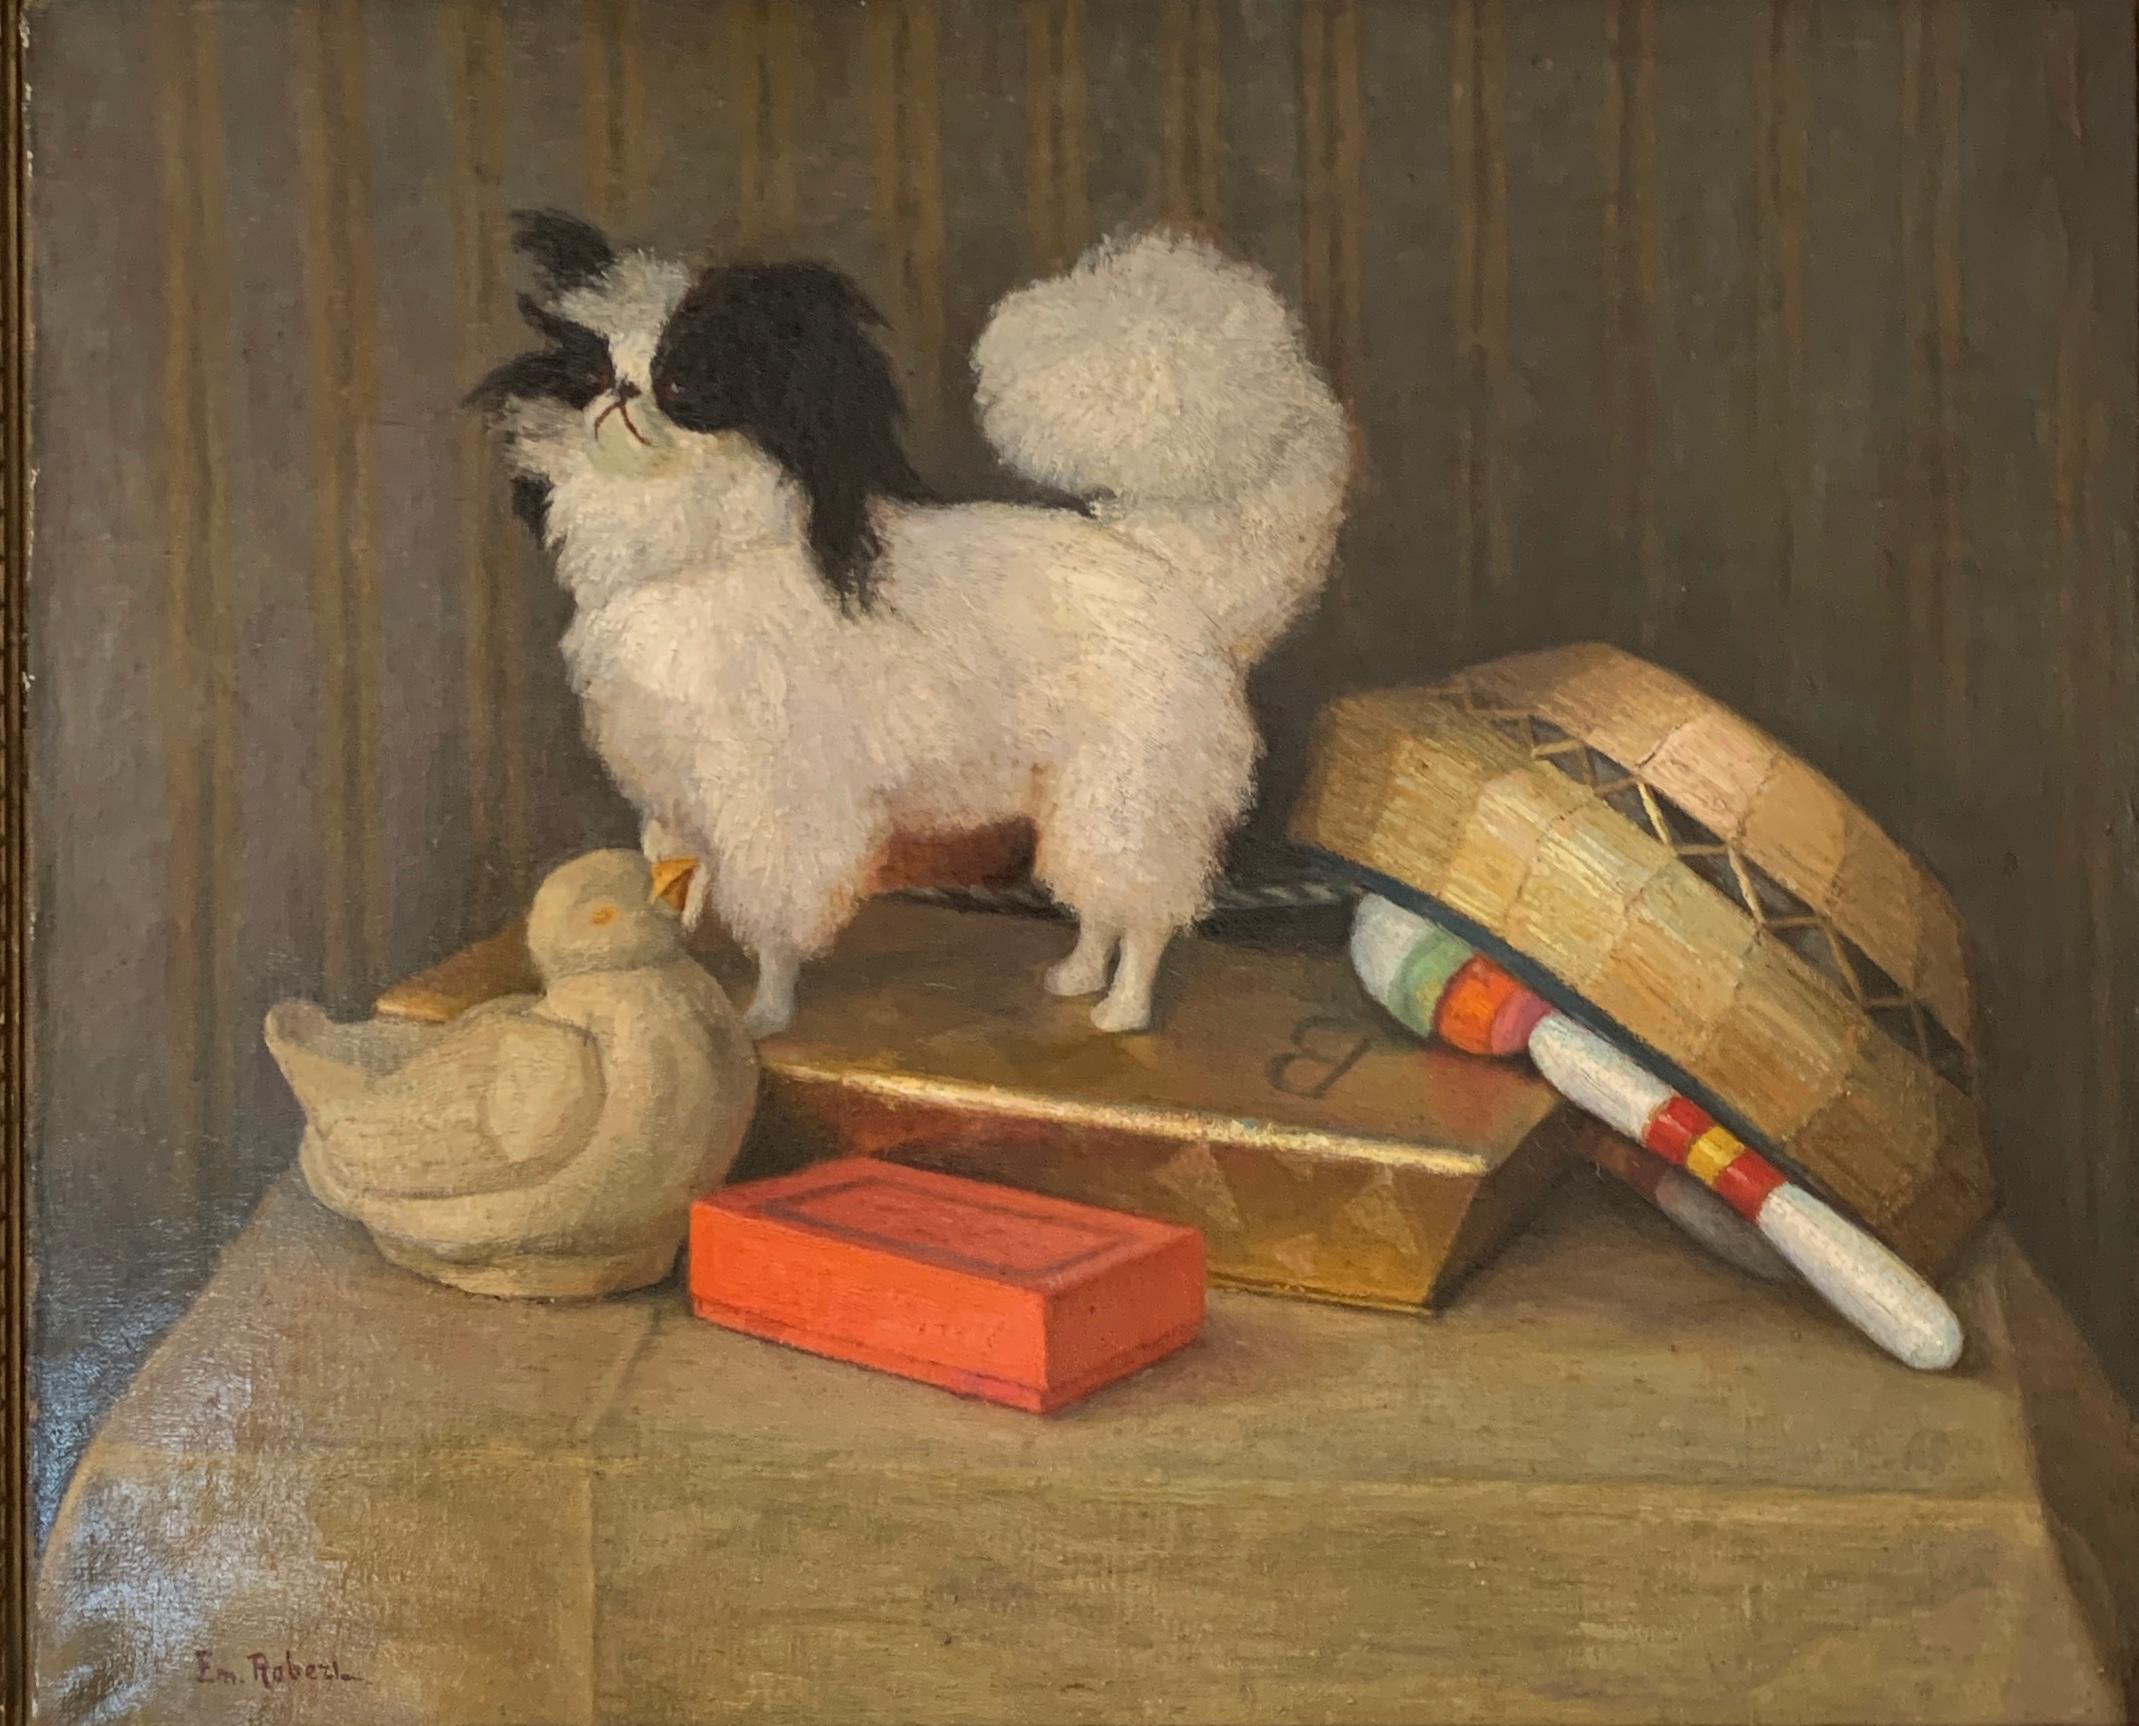 French 19th century portrait of a Papillon dog with its toys, books and basket. - Painting by E.Robert